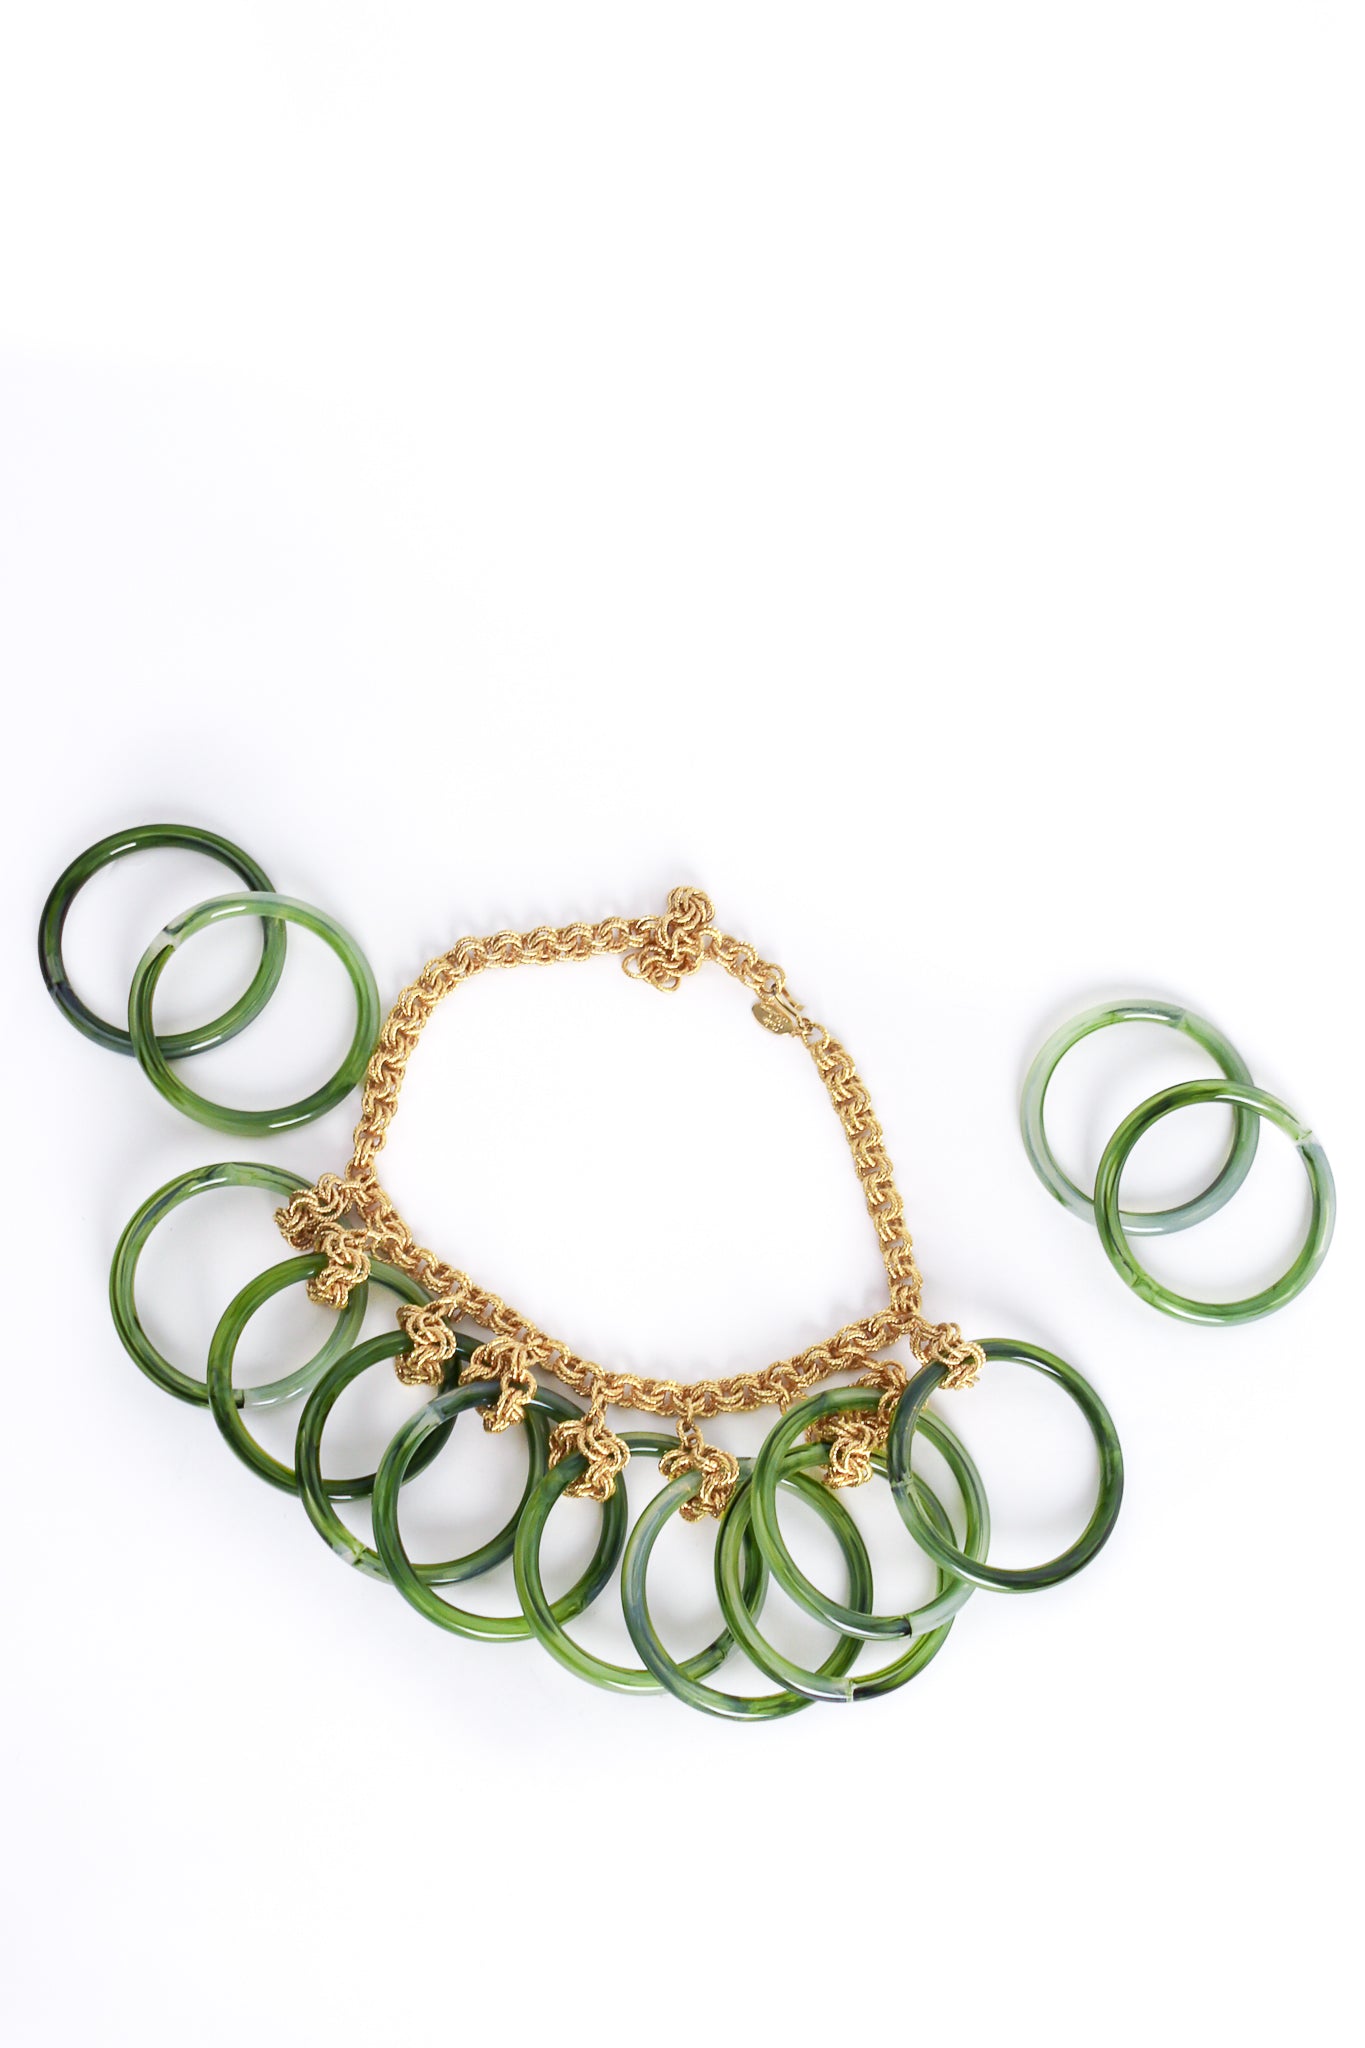 Vintage Julie Rubano Large Lucite Rings Chain Link Necklace with Bangles at Recess LA